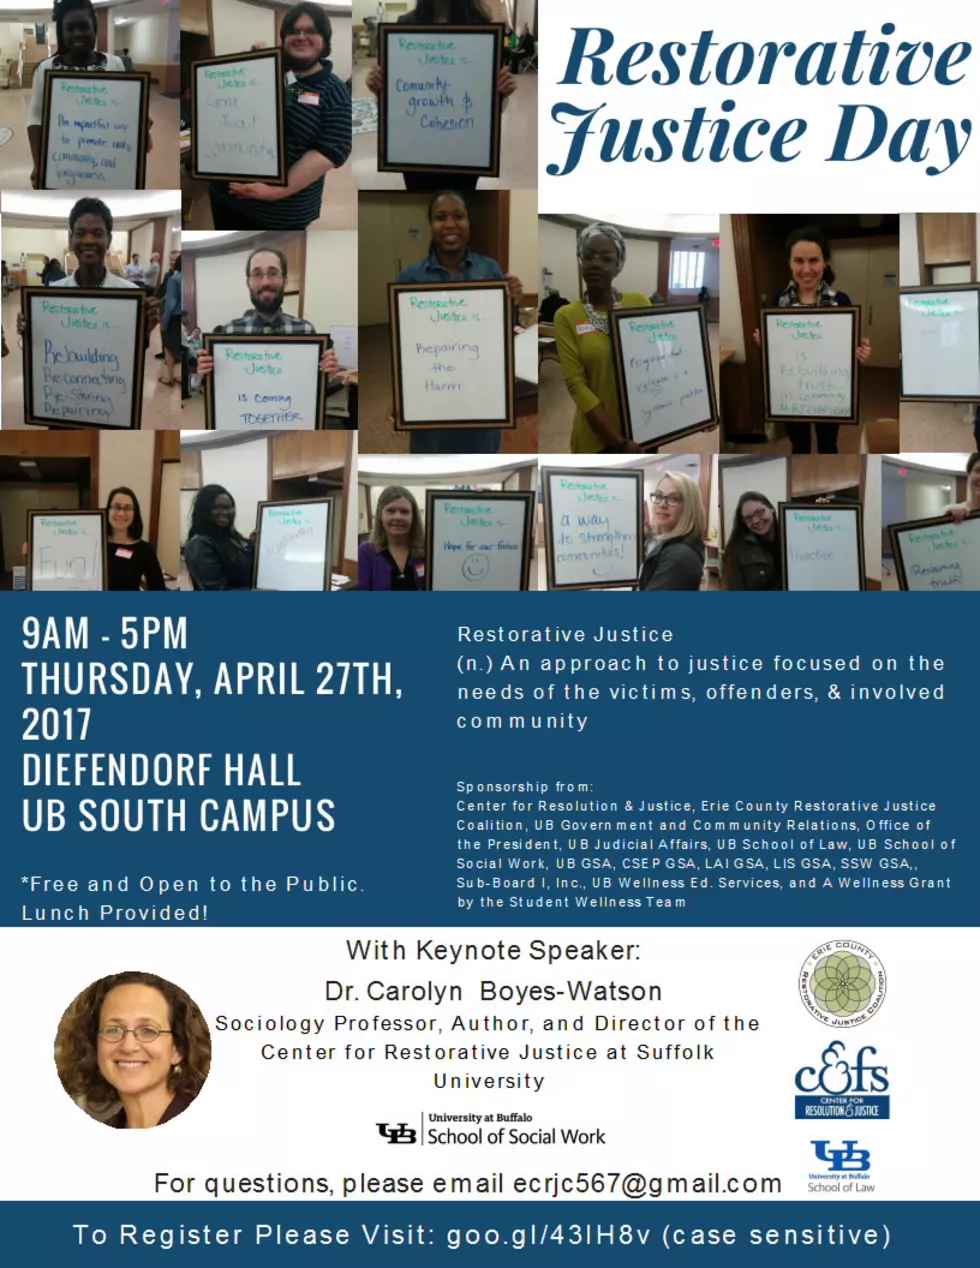 Community: Come Out for Restorative Justice Day on April 27